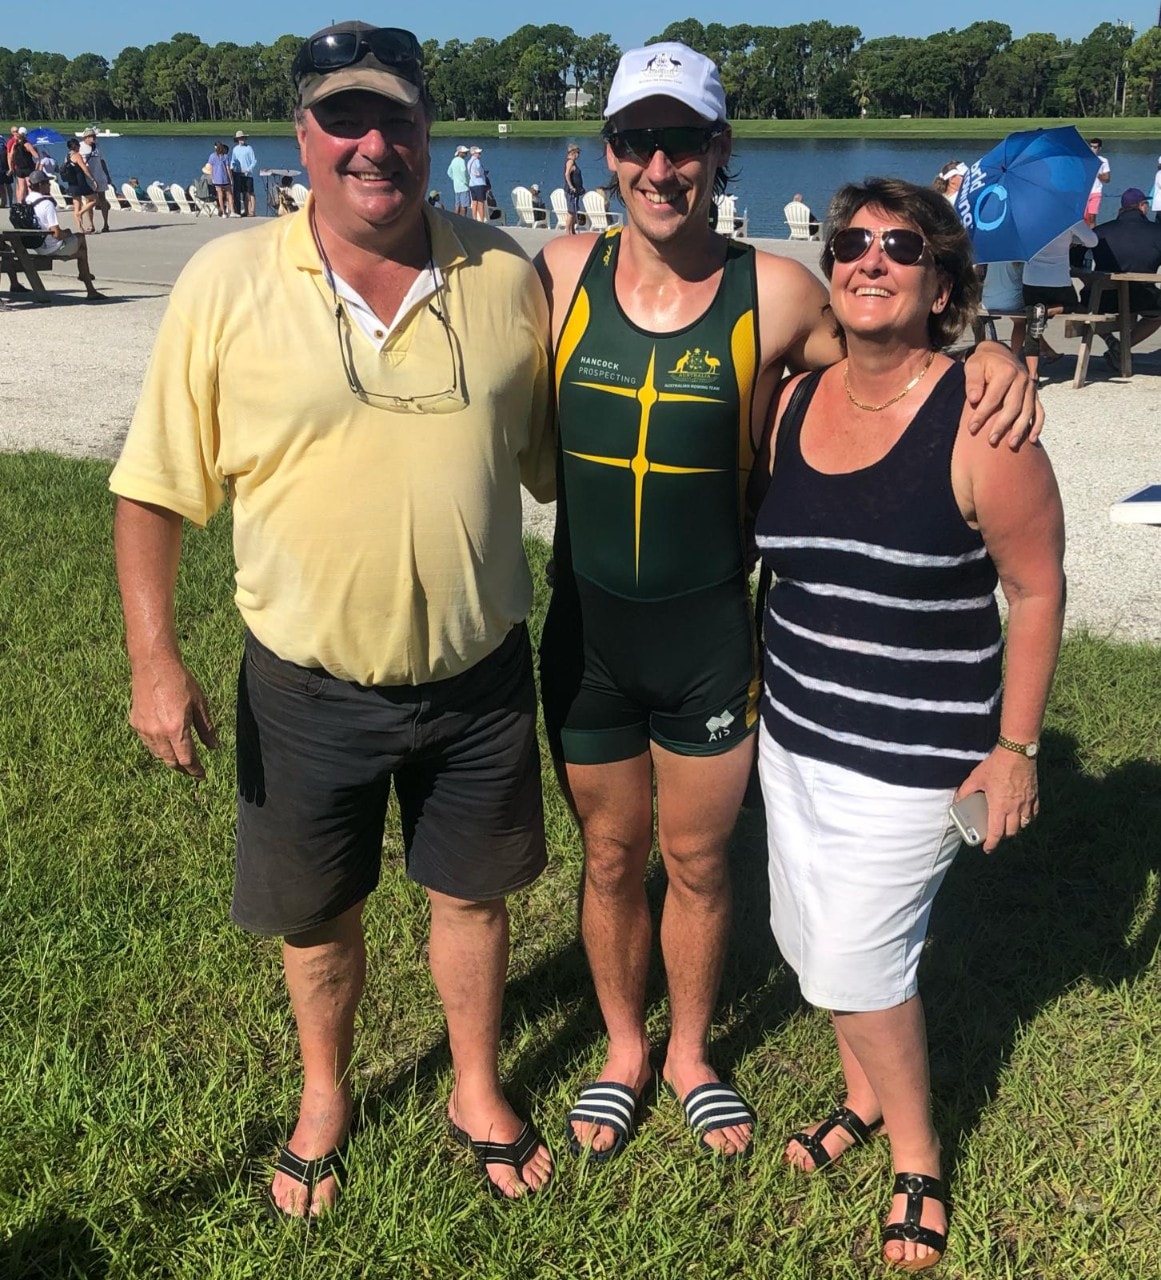 Marcus Britt (middle) with his parents at the under 23 World Rowing Championships in Sarasota, Florida.